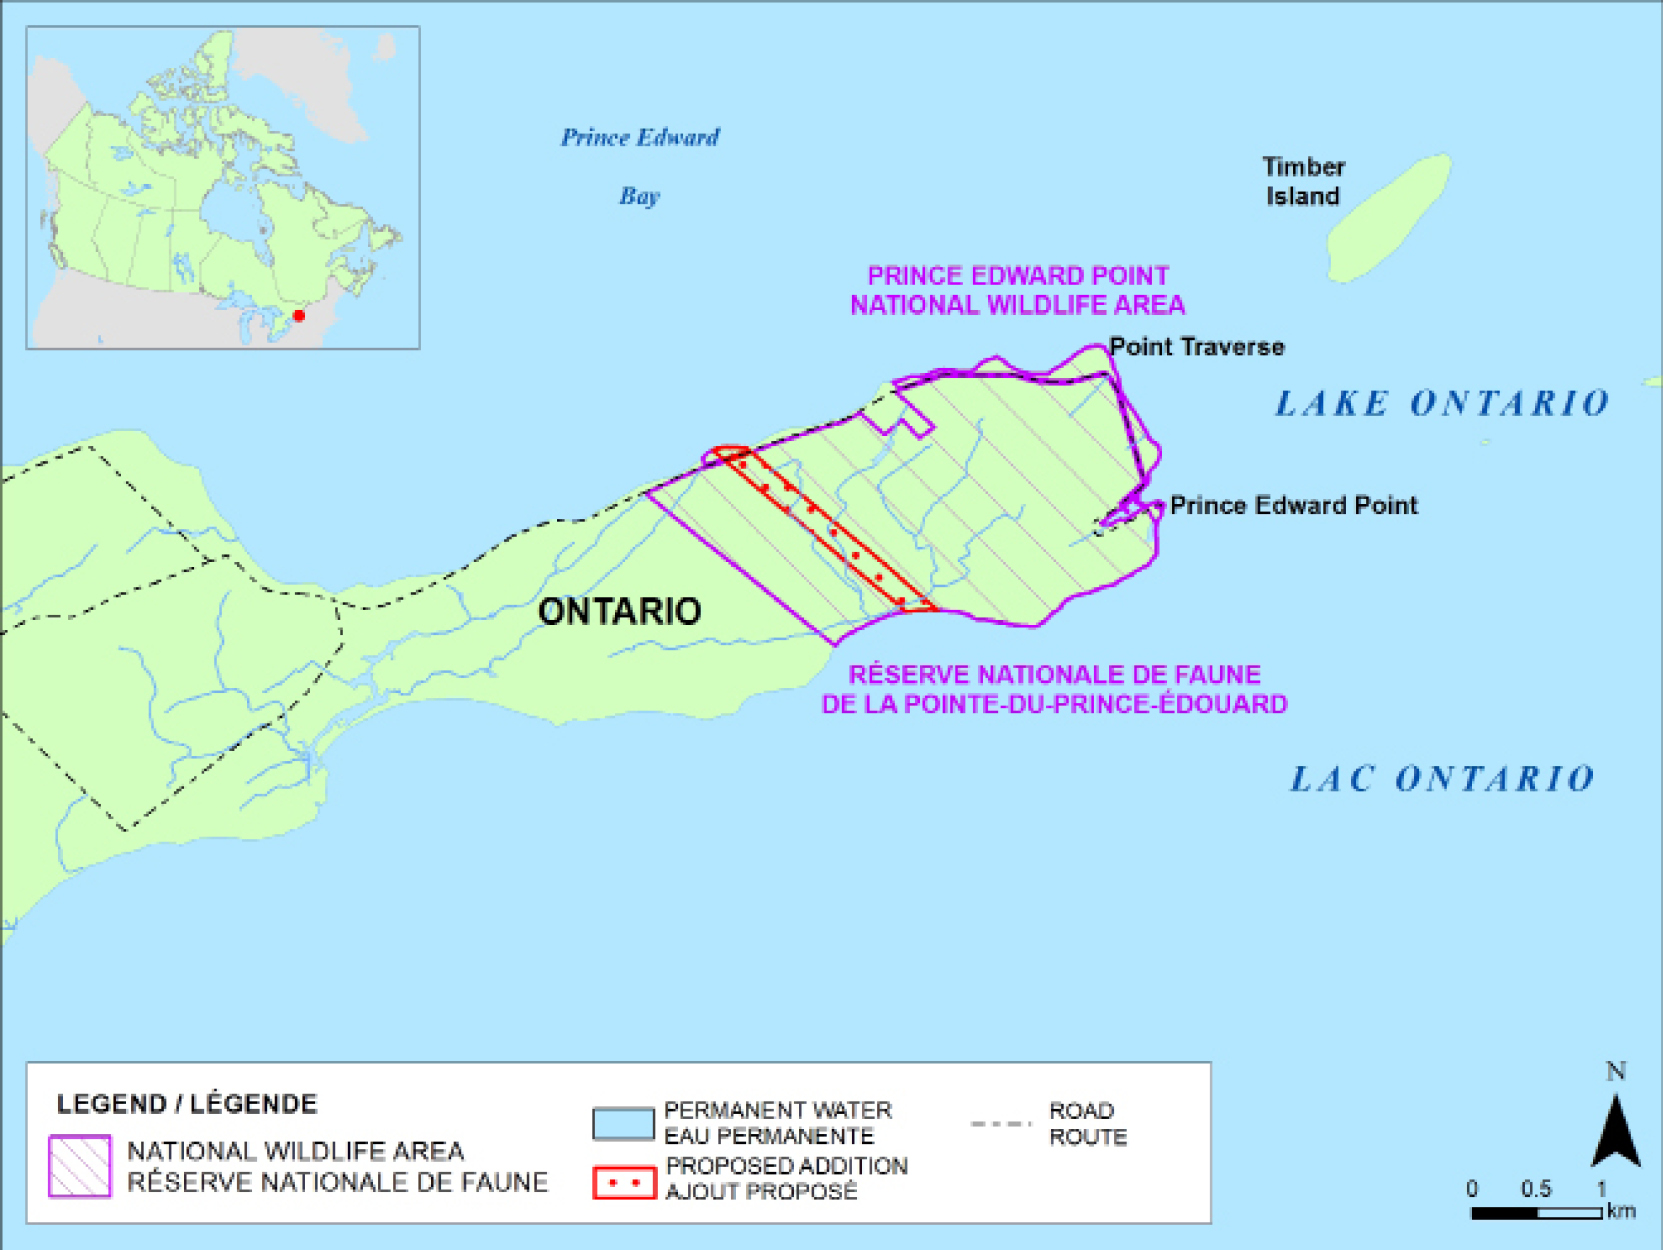 Figure 2. Map of the proposed additions to the Prince Edward Point National Wildlife Area – long description follows.